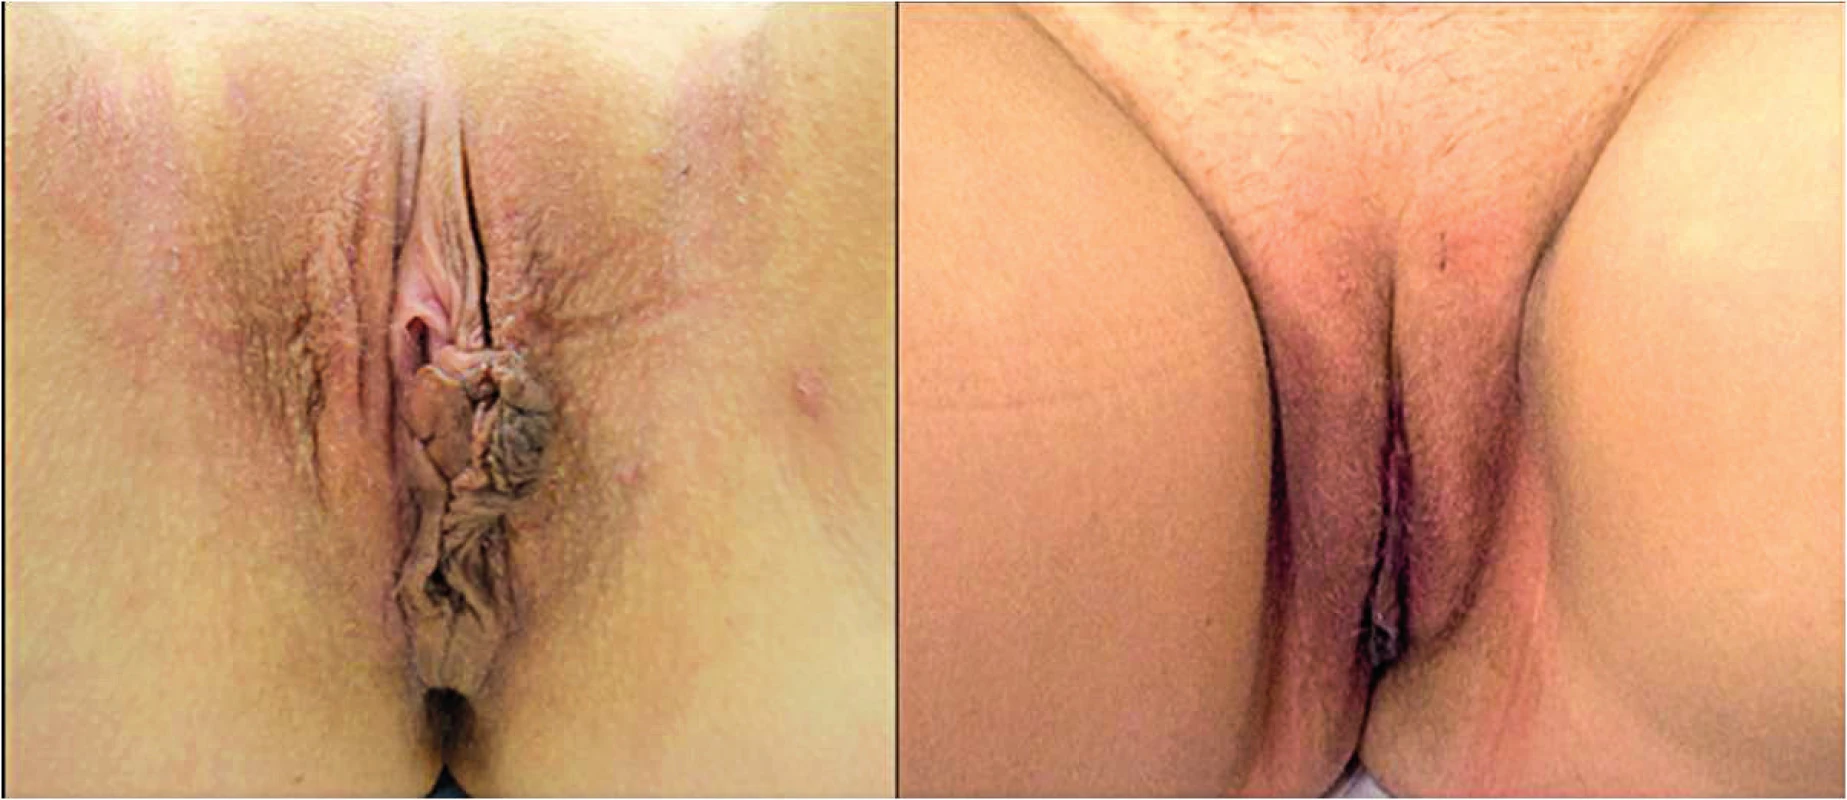 (Left) Preoperative view in a 34 years old patient. (Right) Post-operative view at 10 months